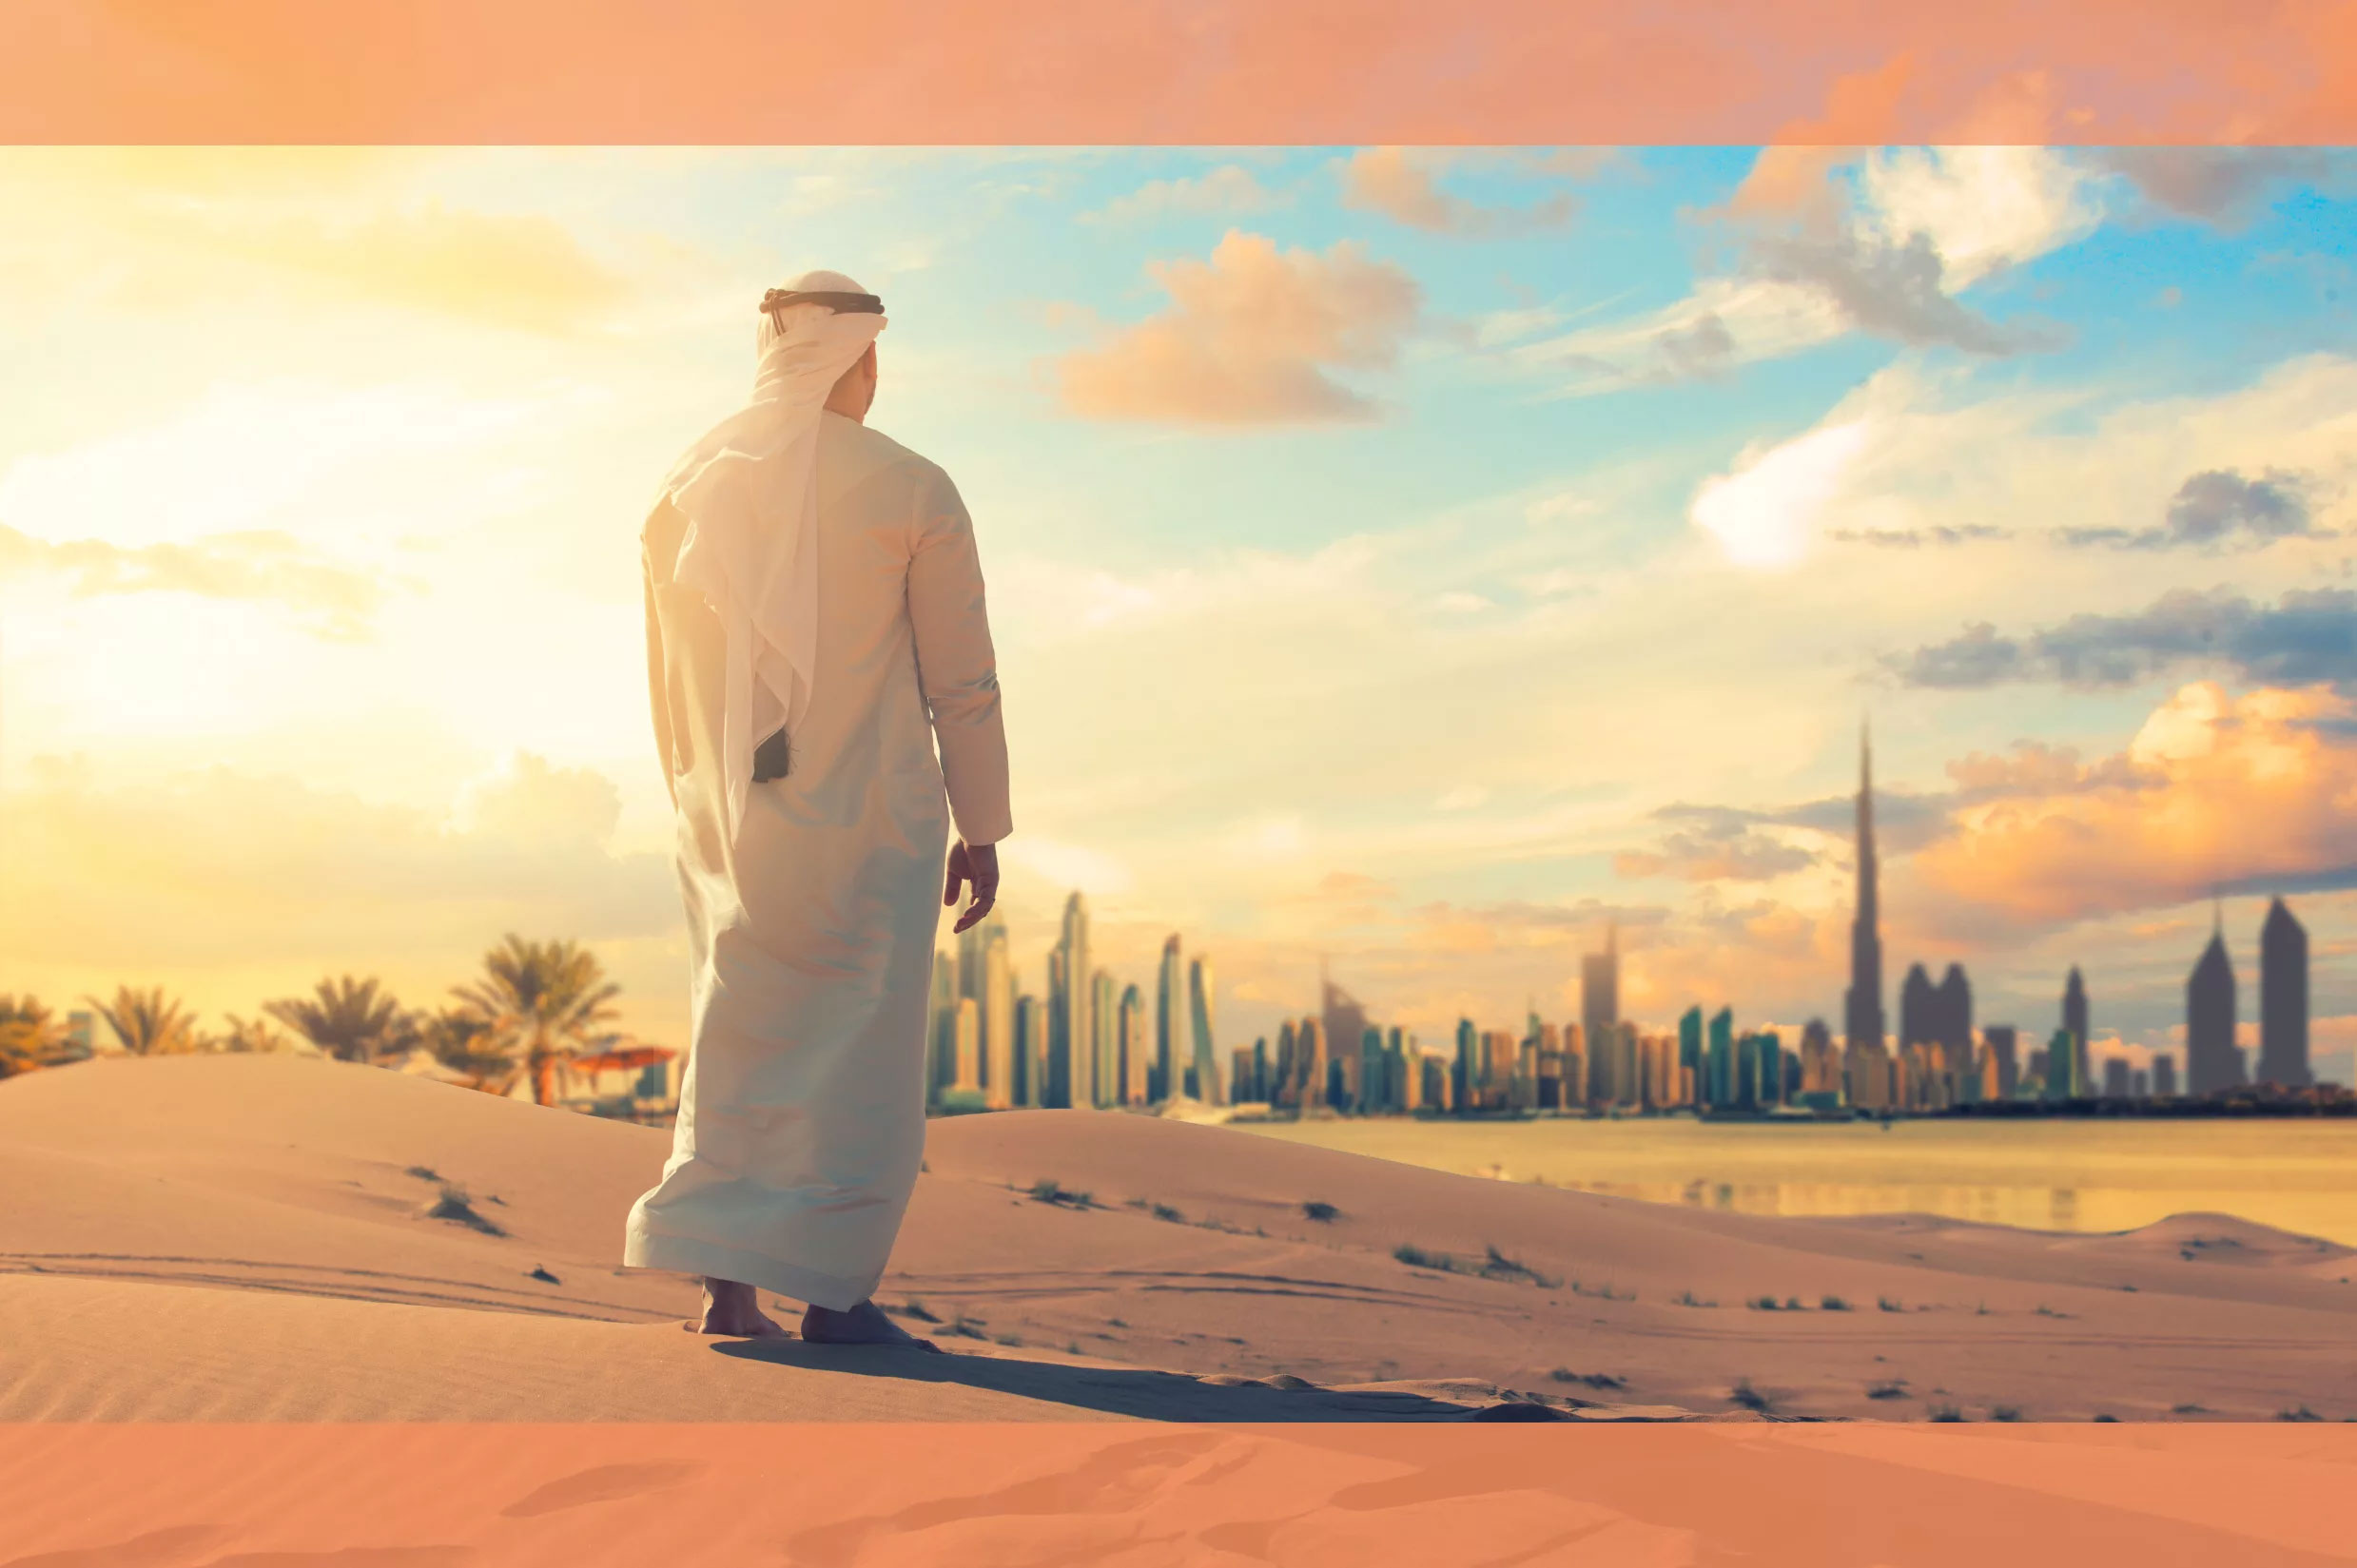 Man standing in the sand with Dubai in the background